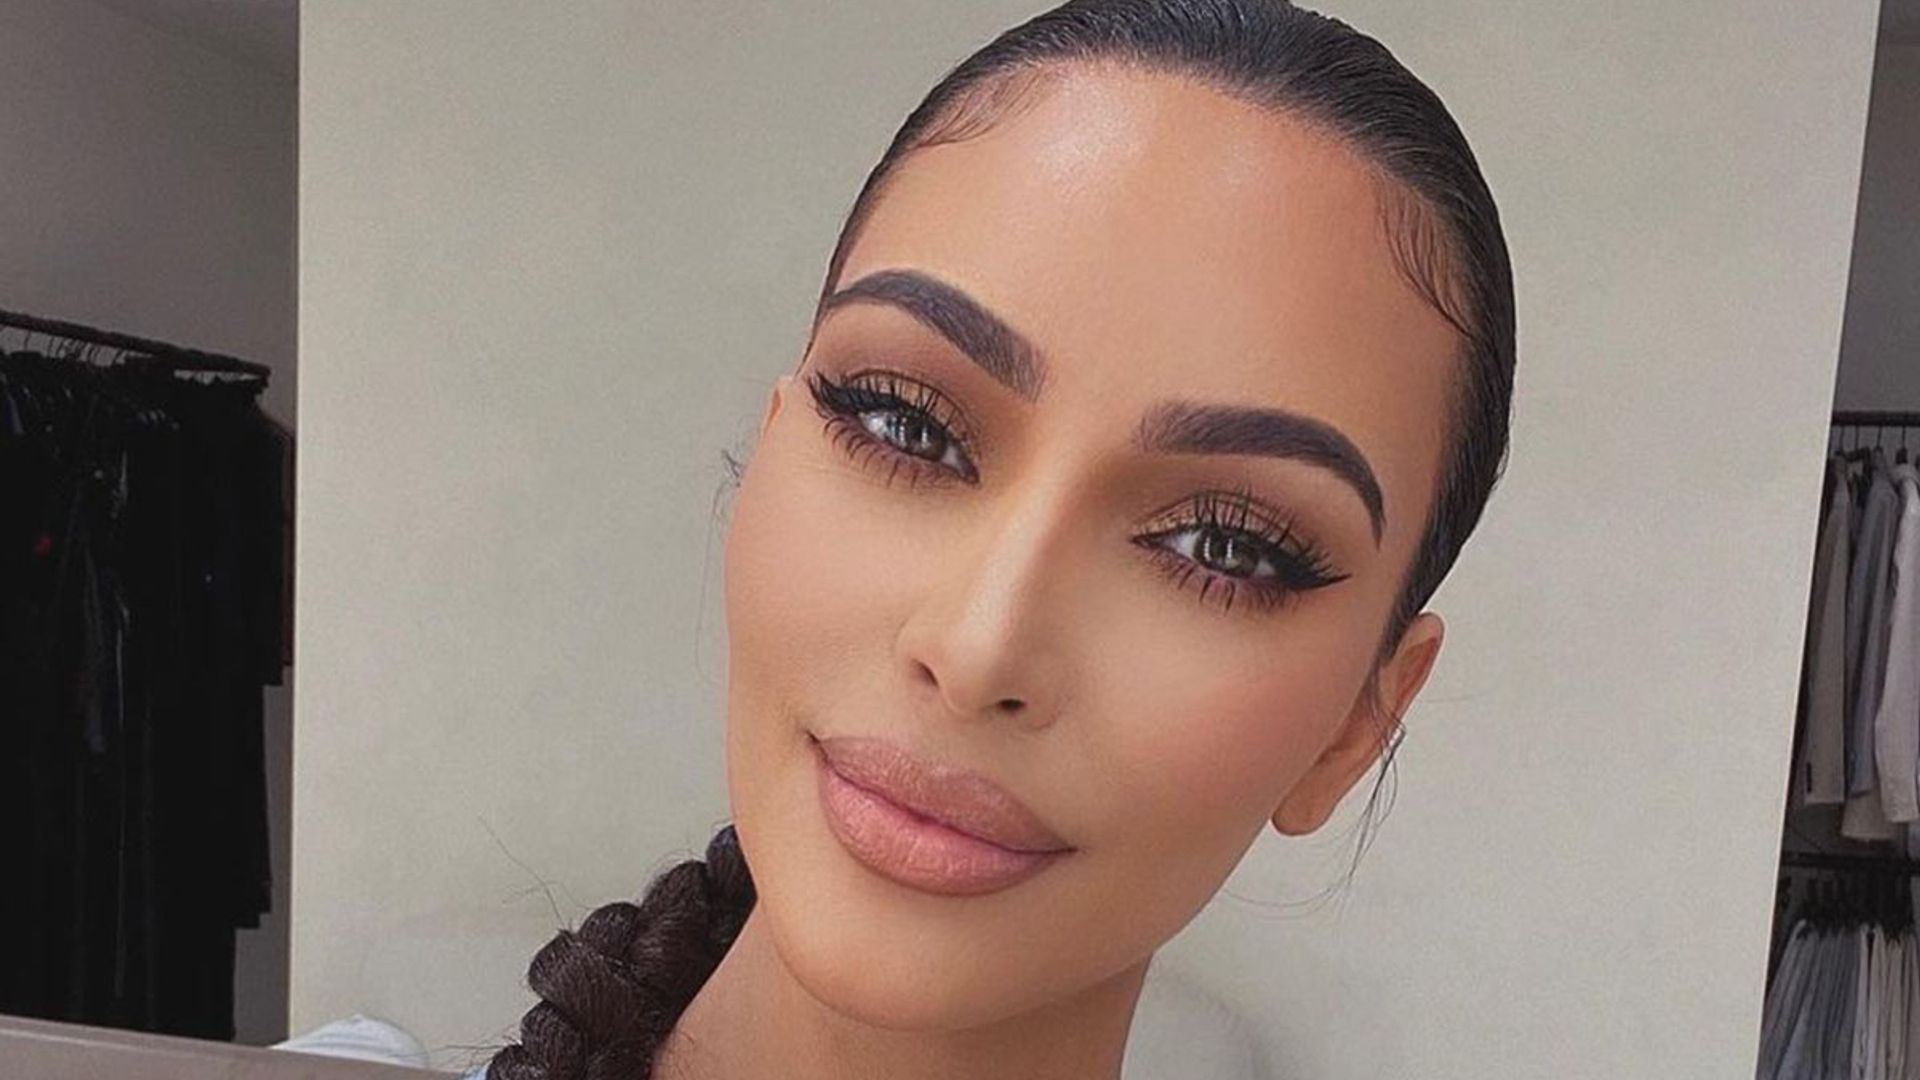 Kim Kardashian declares her love in emotional message - and fans react